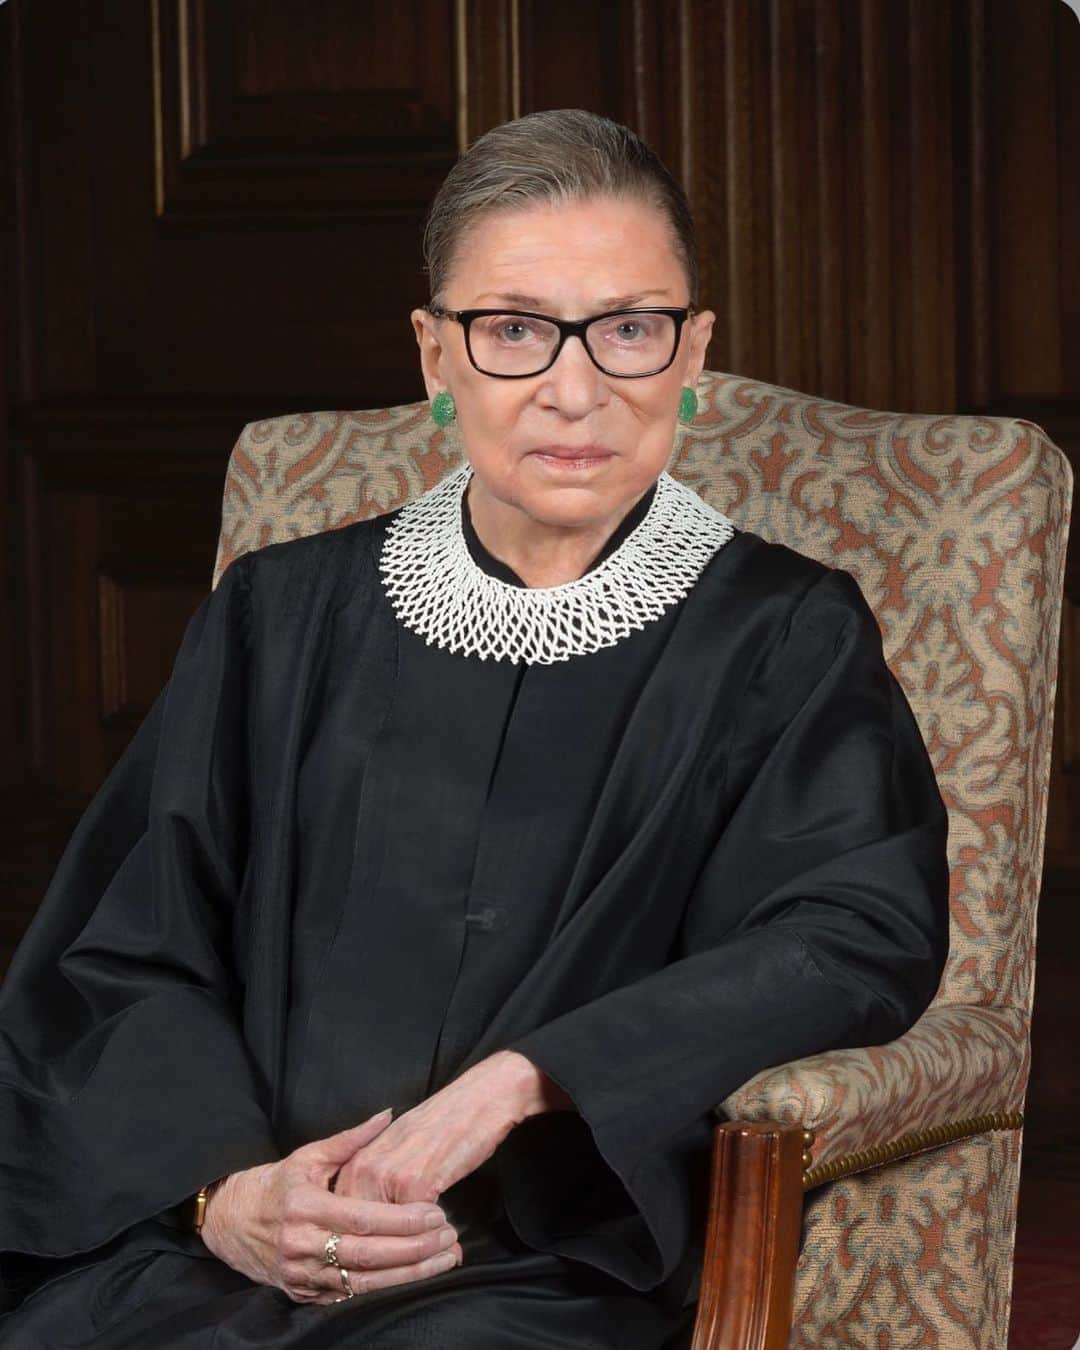 シャロン・ローレンスさんのインスタグラム写真 - (シャロン・ローレンスInstagram)「RIP #Justice #ruthbaderginsberg aka #RBG. You will always be appreciated for your talent and tenacity. Your strength has been an inspiration for so many and there are warriors ready to continue the fight for equality that was your hallmark.   She changed the way the world is for American women. For more than a decade, until her first judicial appointment in 1980, she led the fight in the courts for gender equality. When she began her legal crusade, women were treated, by law, differently from men. Hundreds of state and federal laws restricted what women could do, barring them from jobs, rights and even from jury service. By the time she donned judicial robes, however, Ginsburg had worked a revolution. That was never more evident than in 1996 when, as a relatively new Supreme Court justice, Ginsburg wrote the court's 7-to-1 opinion declaring that the Virginia Military Institute could no longer remain an all-male institution. True, said Ginsburg, most women — indeed most men — would not want to meet the rigorous demands of VMI. But the state, she said, could not exclude women who could meet those demands. Reliance on overbroad generalizations ... estimates about the way most men or most women are, will not suffice to deny opportunity to women whose talent and capacity place them outside the average description," Ginsburg wrote.  Just weeks before her death she asked he Grand daughter to deliver this message -“My most fervent wish is that I will not be replaced until a new president is installed."   At the center of the battle to achieve that will be Senate Majority Leader Mitch McConnell. In 2016 he took a step unprecedented in modern times: He refused for nearly a year to allow any consideration of President Obama's supreme court nominee. Back then, McConnell's justification was the upcoming presidential election, which he said would allow voters a chance to weigh in on what kind of justice they wanted. But now, with the tables turned, McConnell has made clear he will not follow the same course. Instead he will try immediately push through a Trump nominee so as to ensure a conservative justice to fill Ginsburg's liberal shoes, even if President Trump were to los」9月19日 9時09分 - sharonelawrence